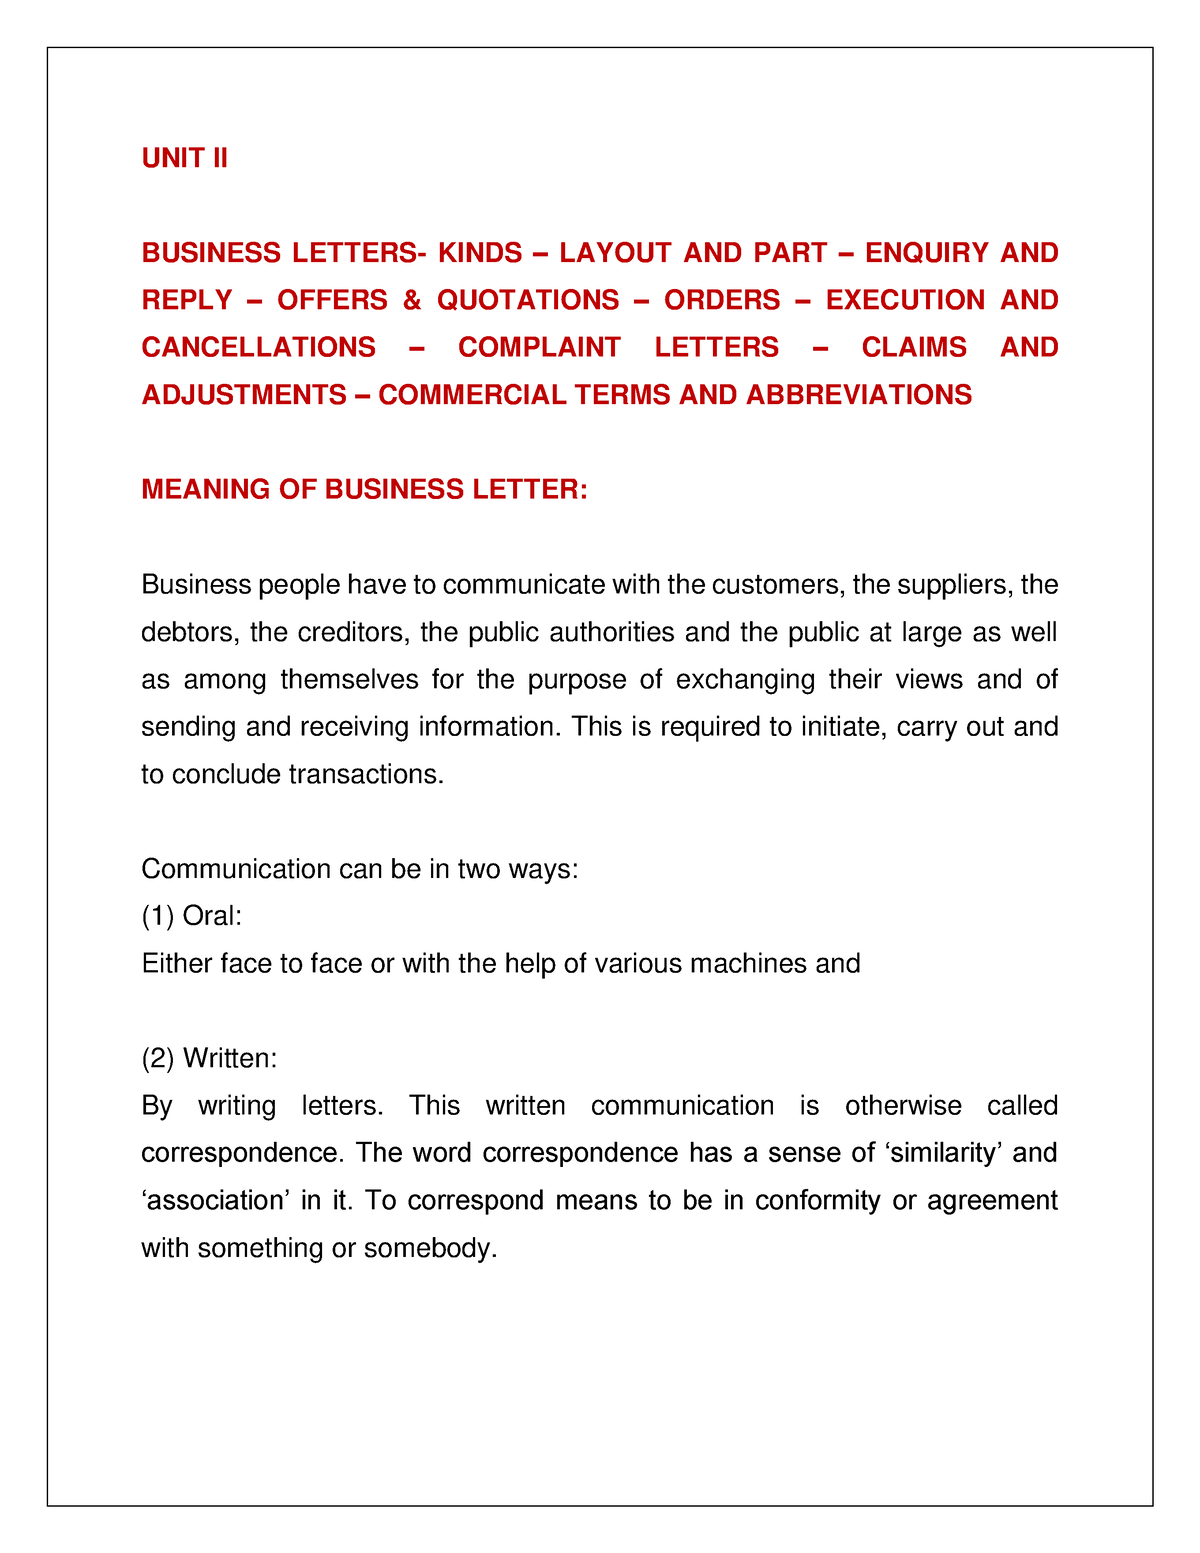 Business Communication: How to Write a Formal Business Letter